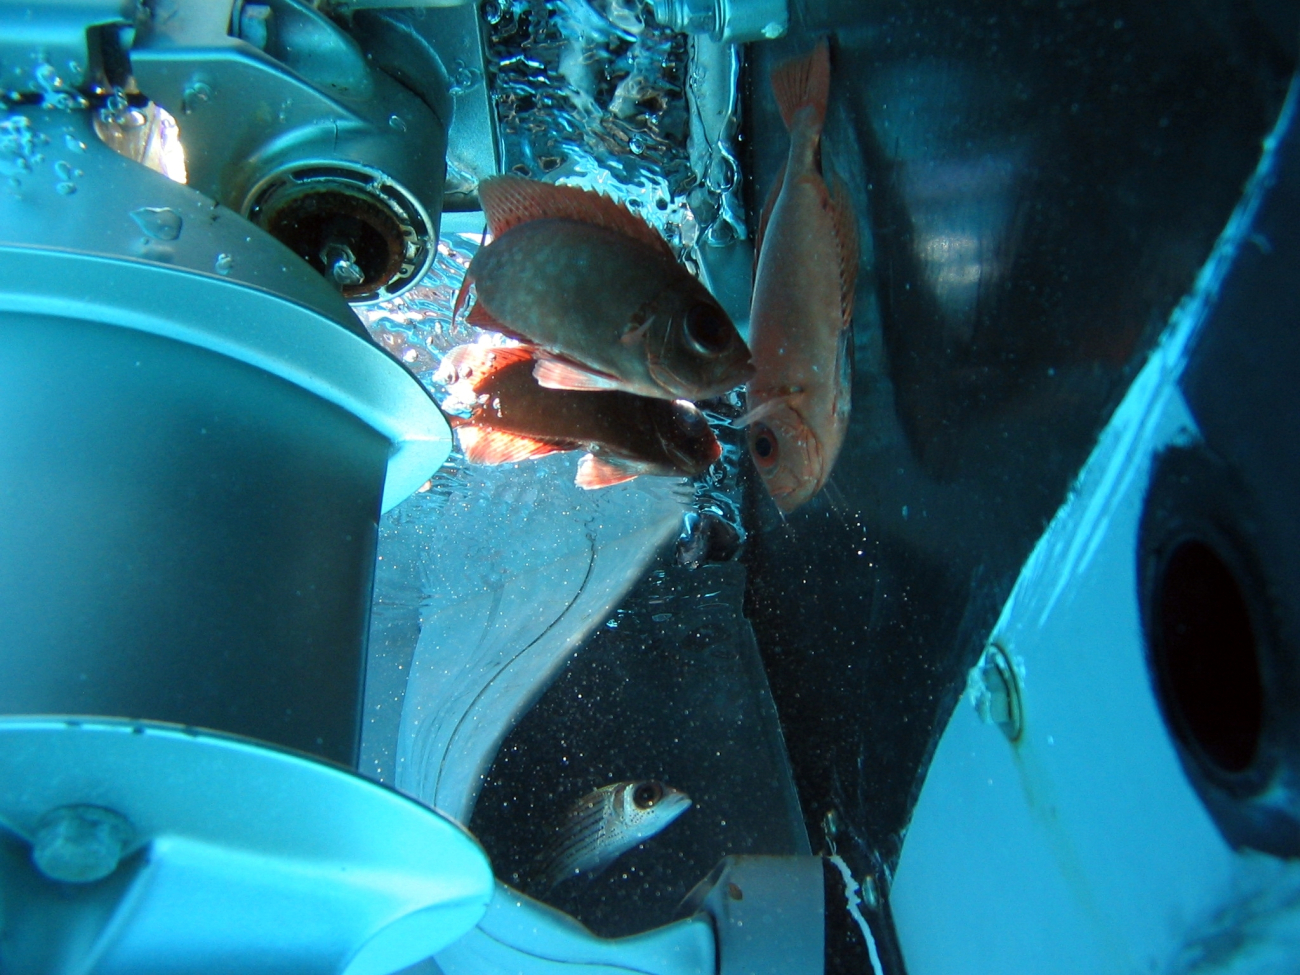 Bigeye on top and squirrelfish on bottom inspecting zodiac outboard engineduring debris cleaning operation